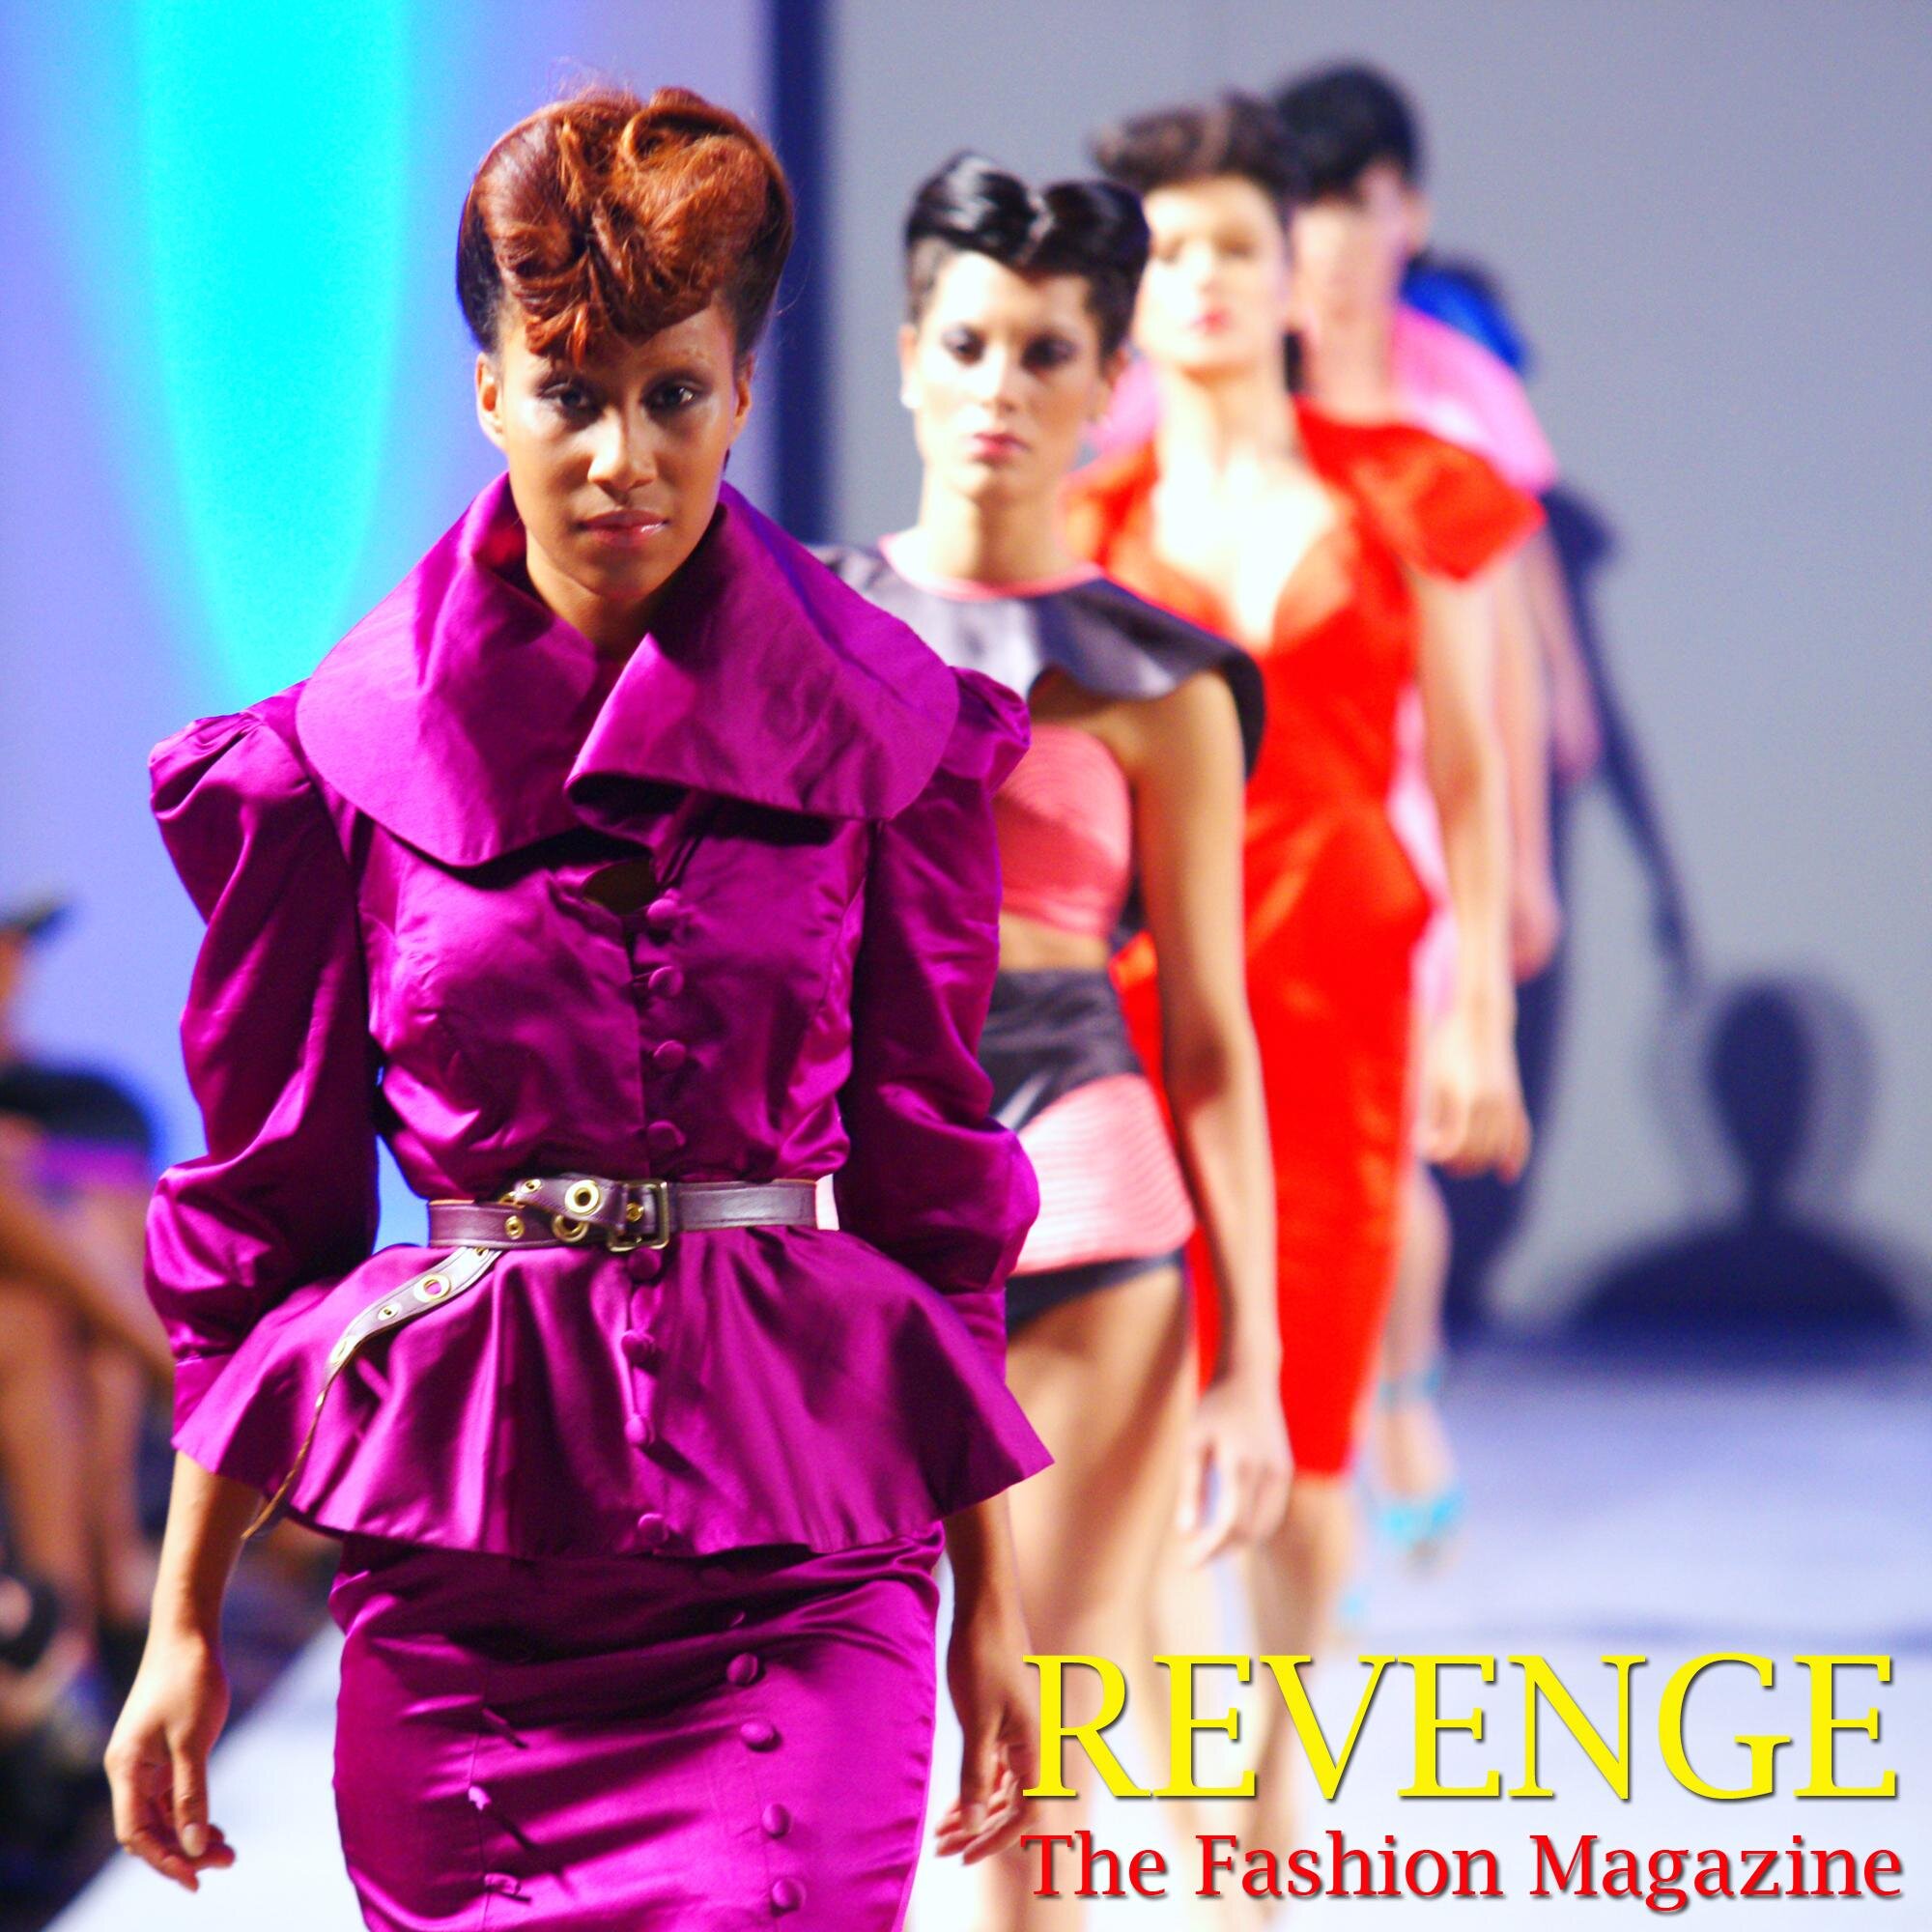 Fashion press providing video coverage of runway shows primarily in the NYC area. Watch our videos over at Revenge Fashion TV YouTube Channel. ❤️